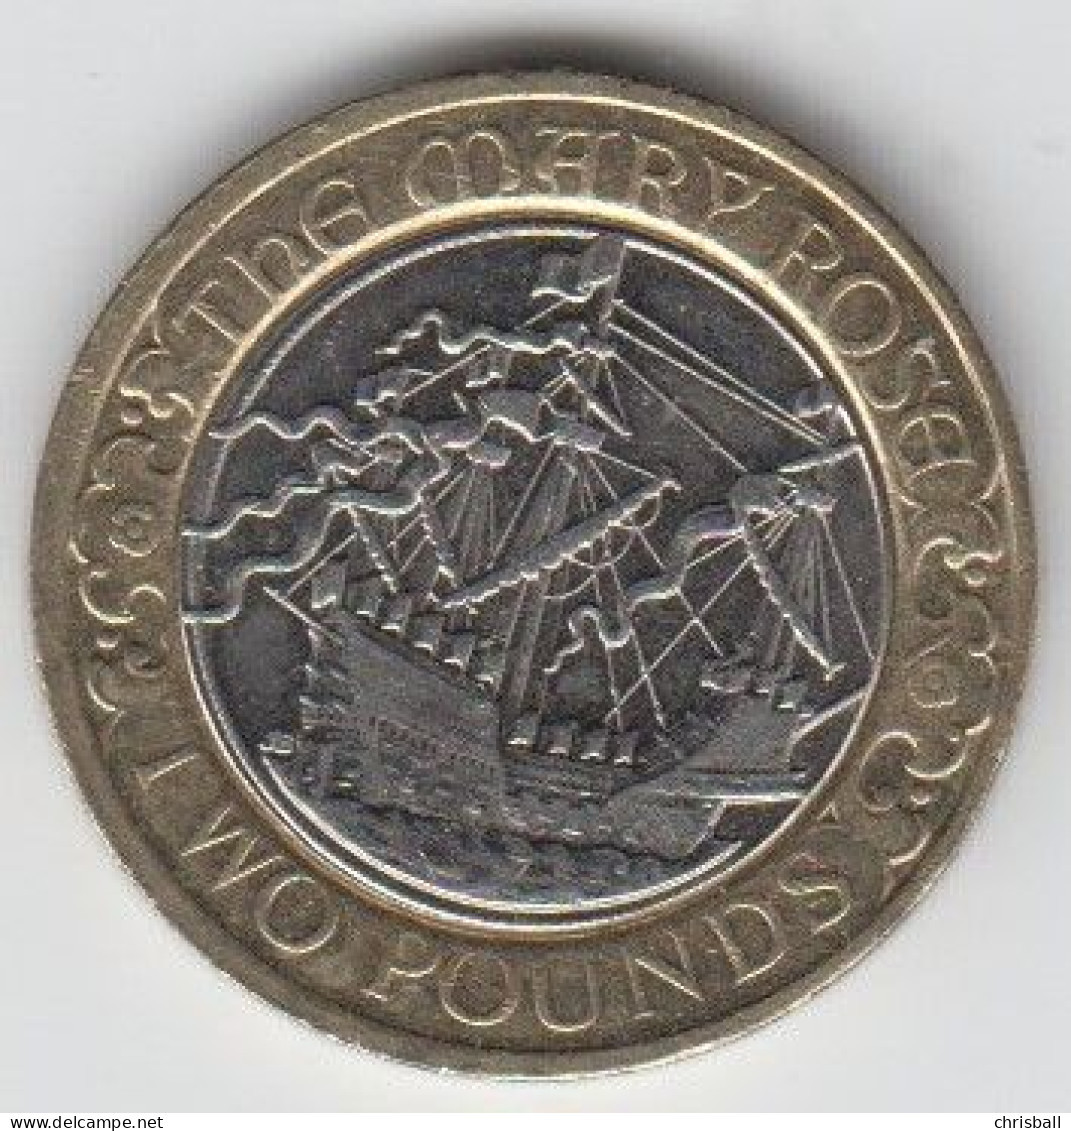 Great Britain UK £2 Coin Mary Rose 2011 Circulated - 50 Pence